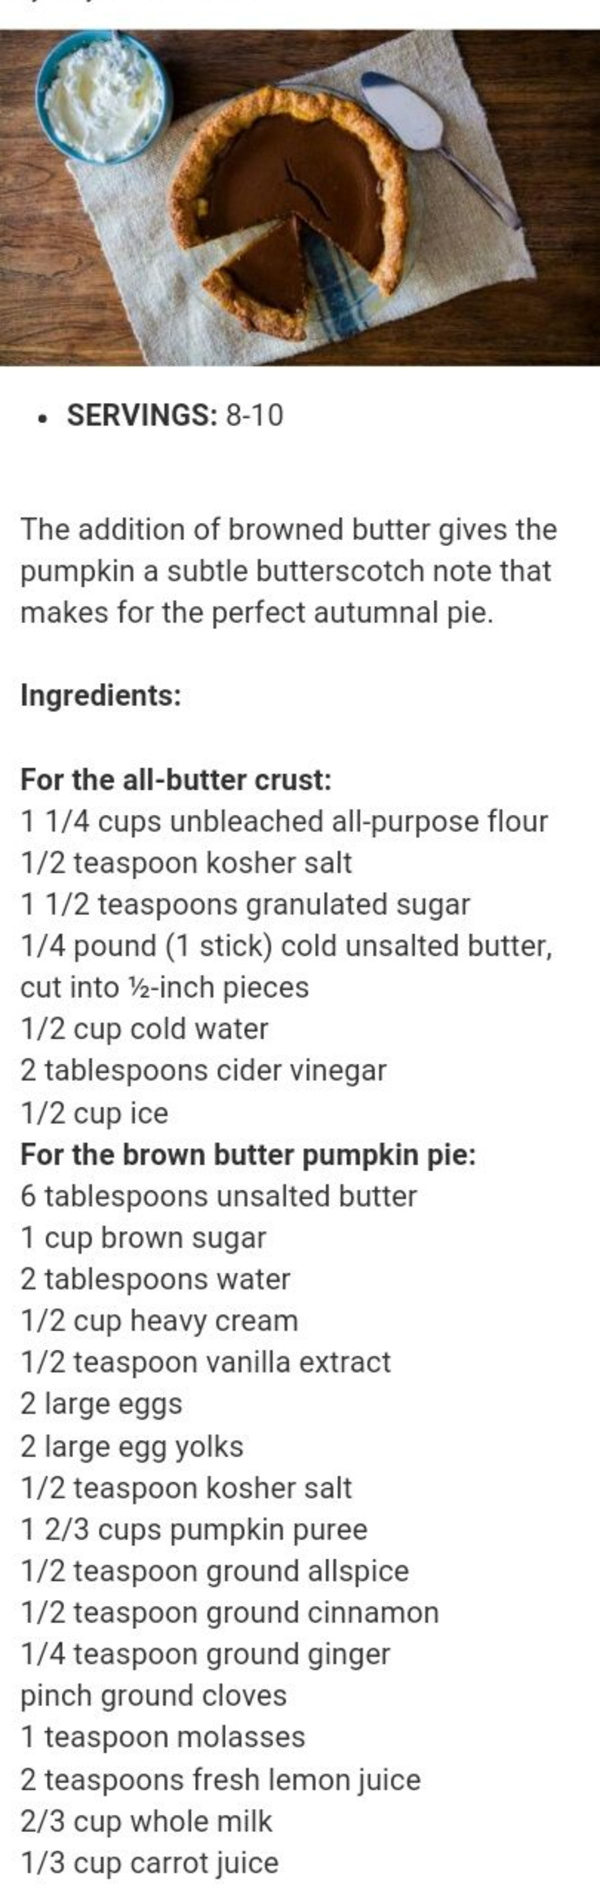 Unique pumpkin pie recipe - EASY Thanksgiving or Christmas dessert idea - more recipes on this page